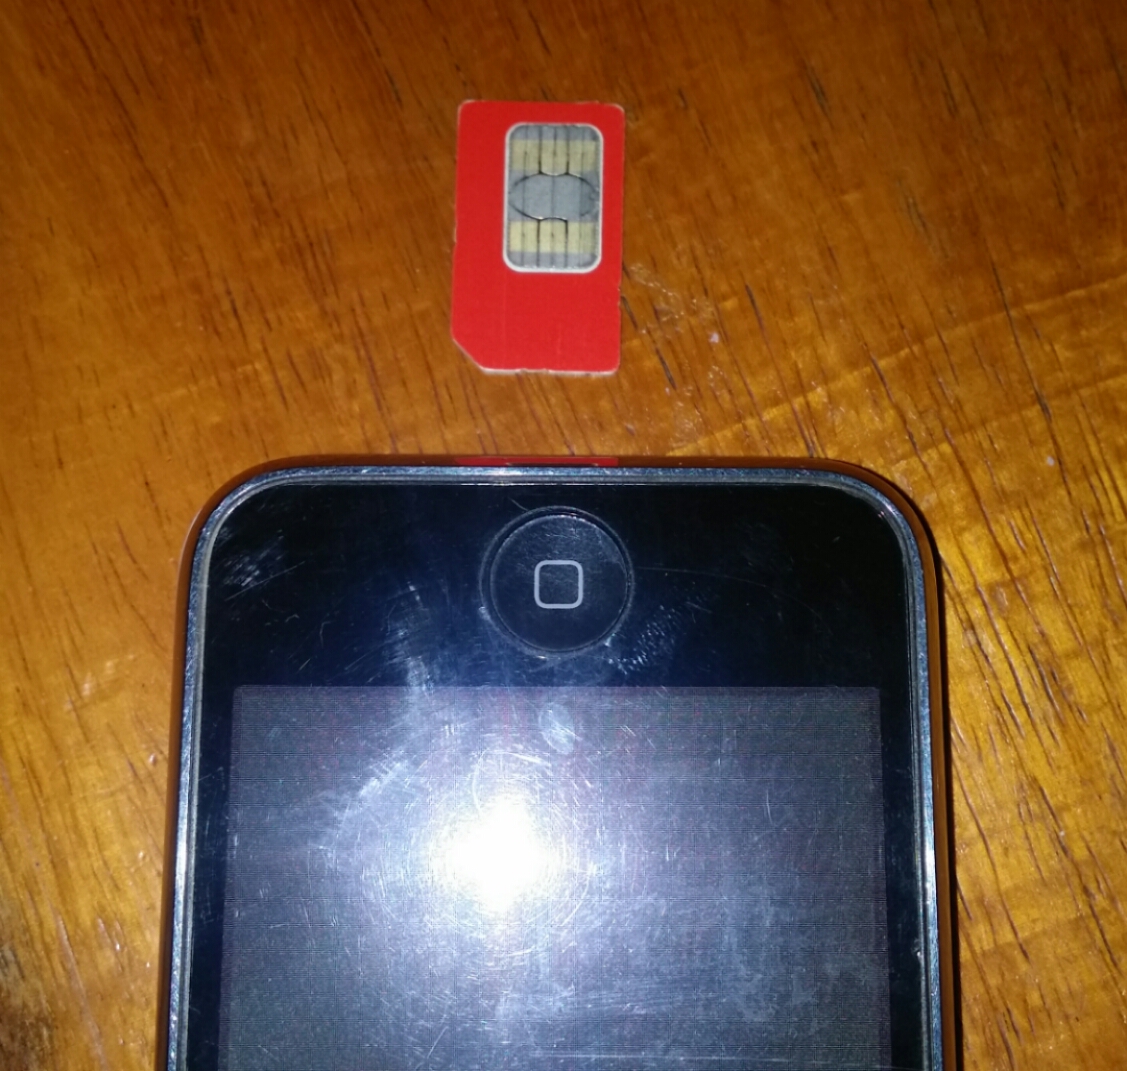 that red thing is a sim card